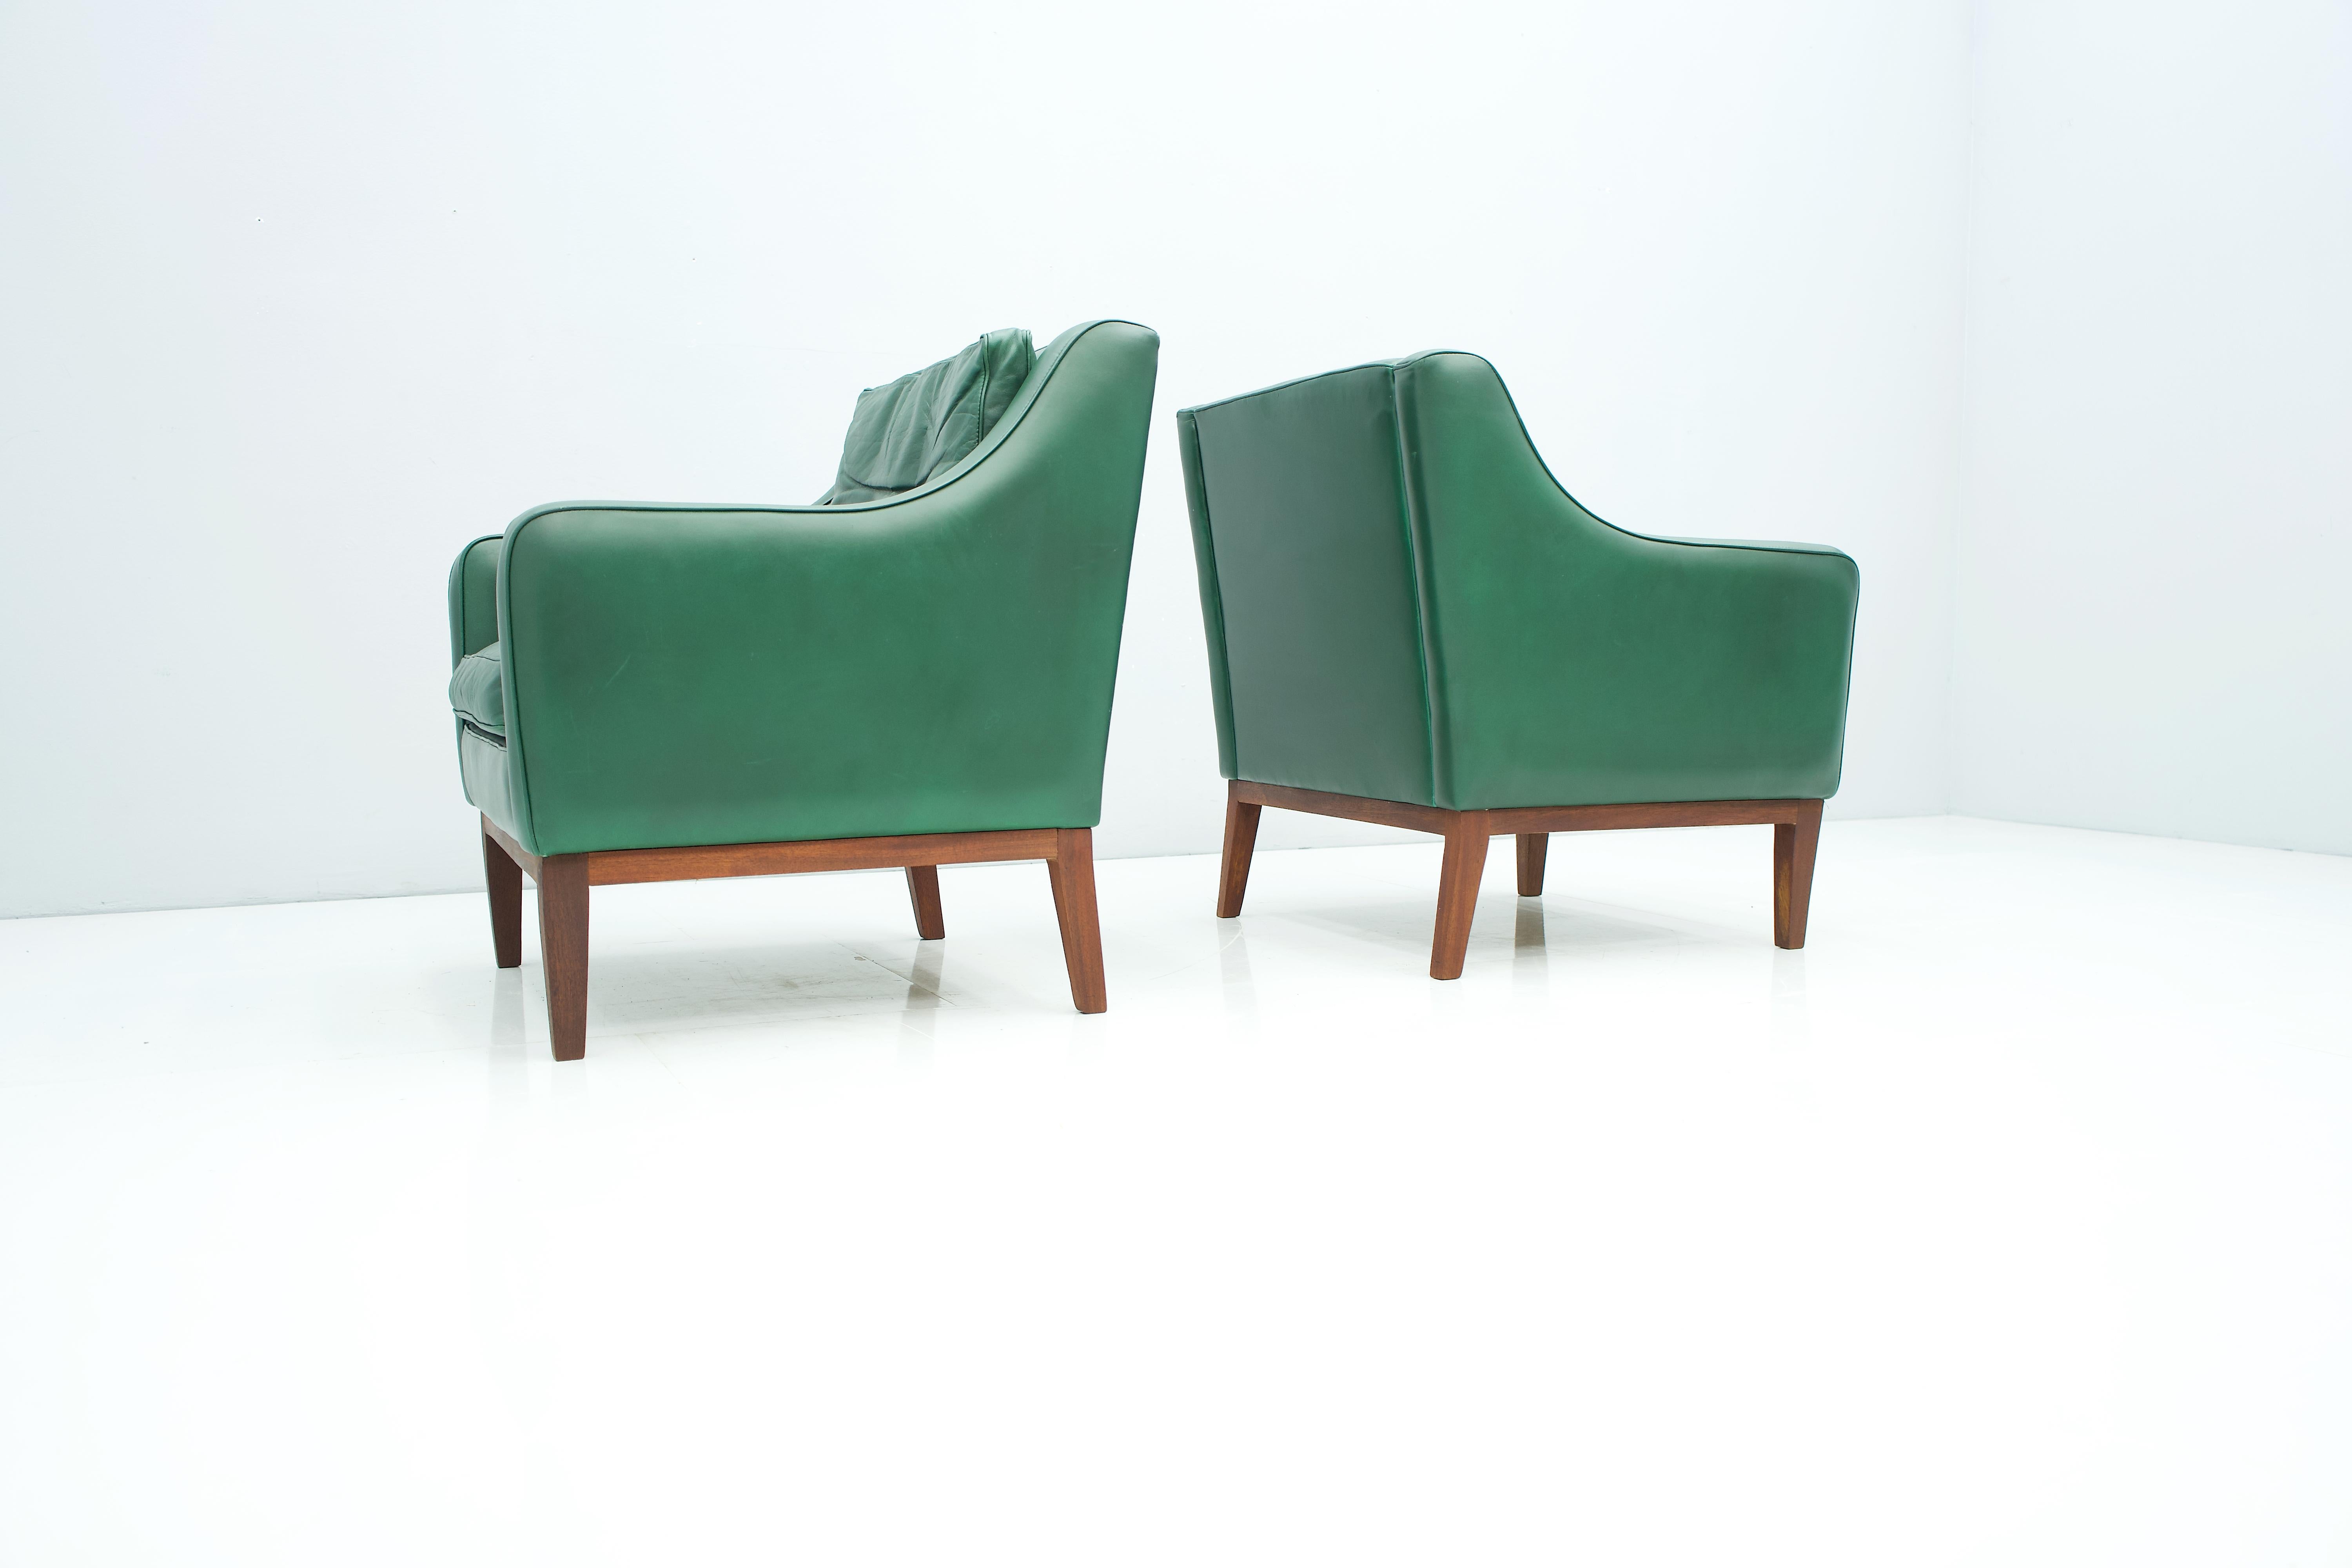 Mid-20th Century Pair of Italian Lounge Chairs in Green Leather, 1958 For Sale